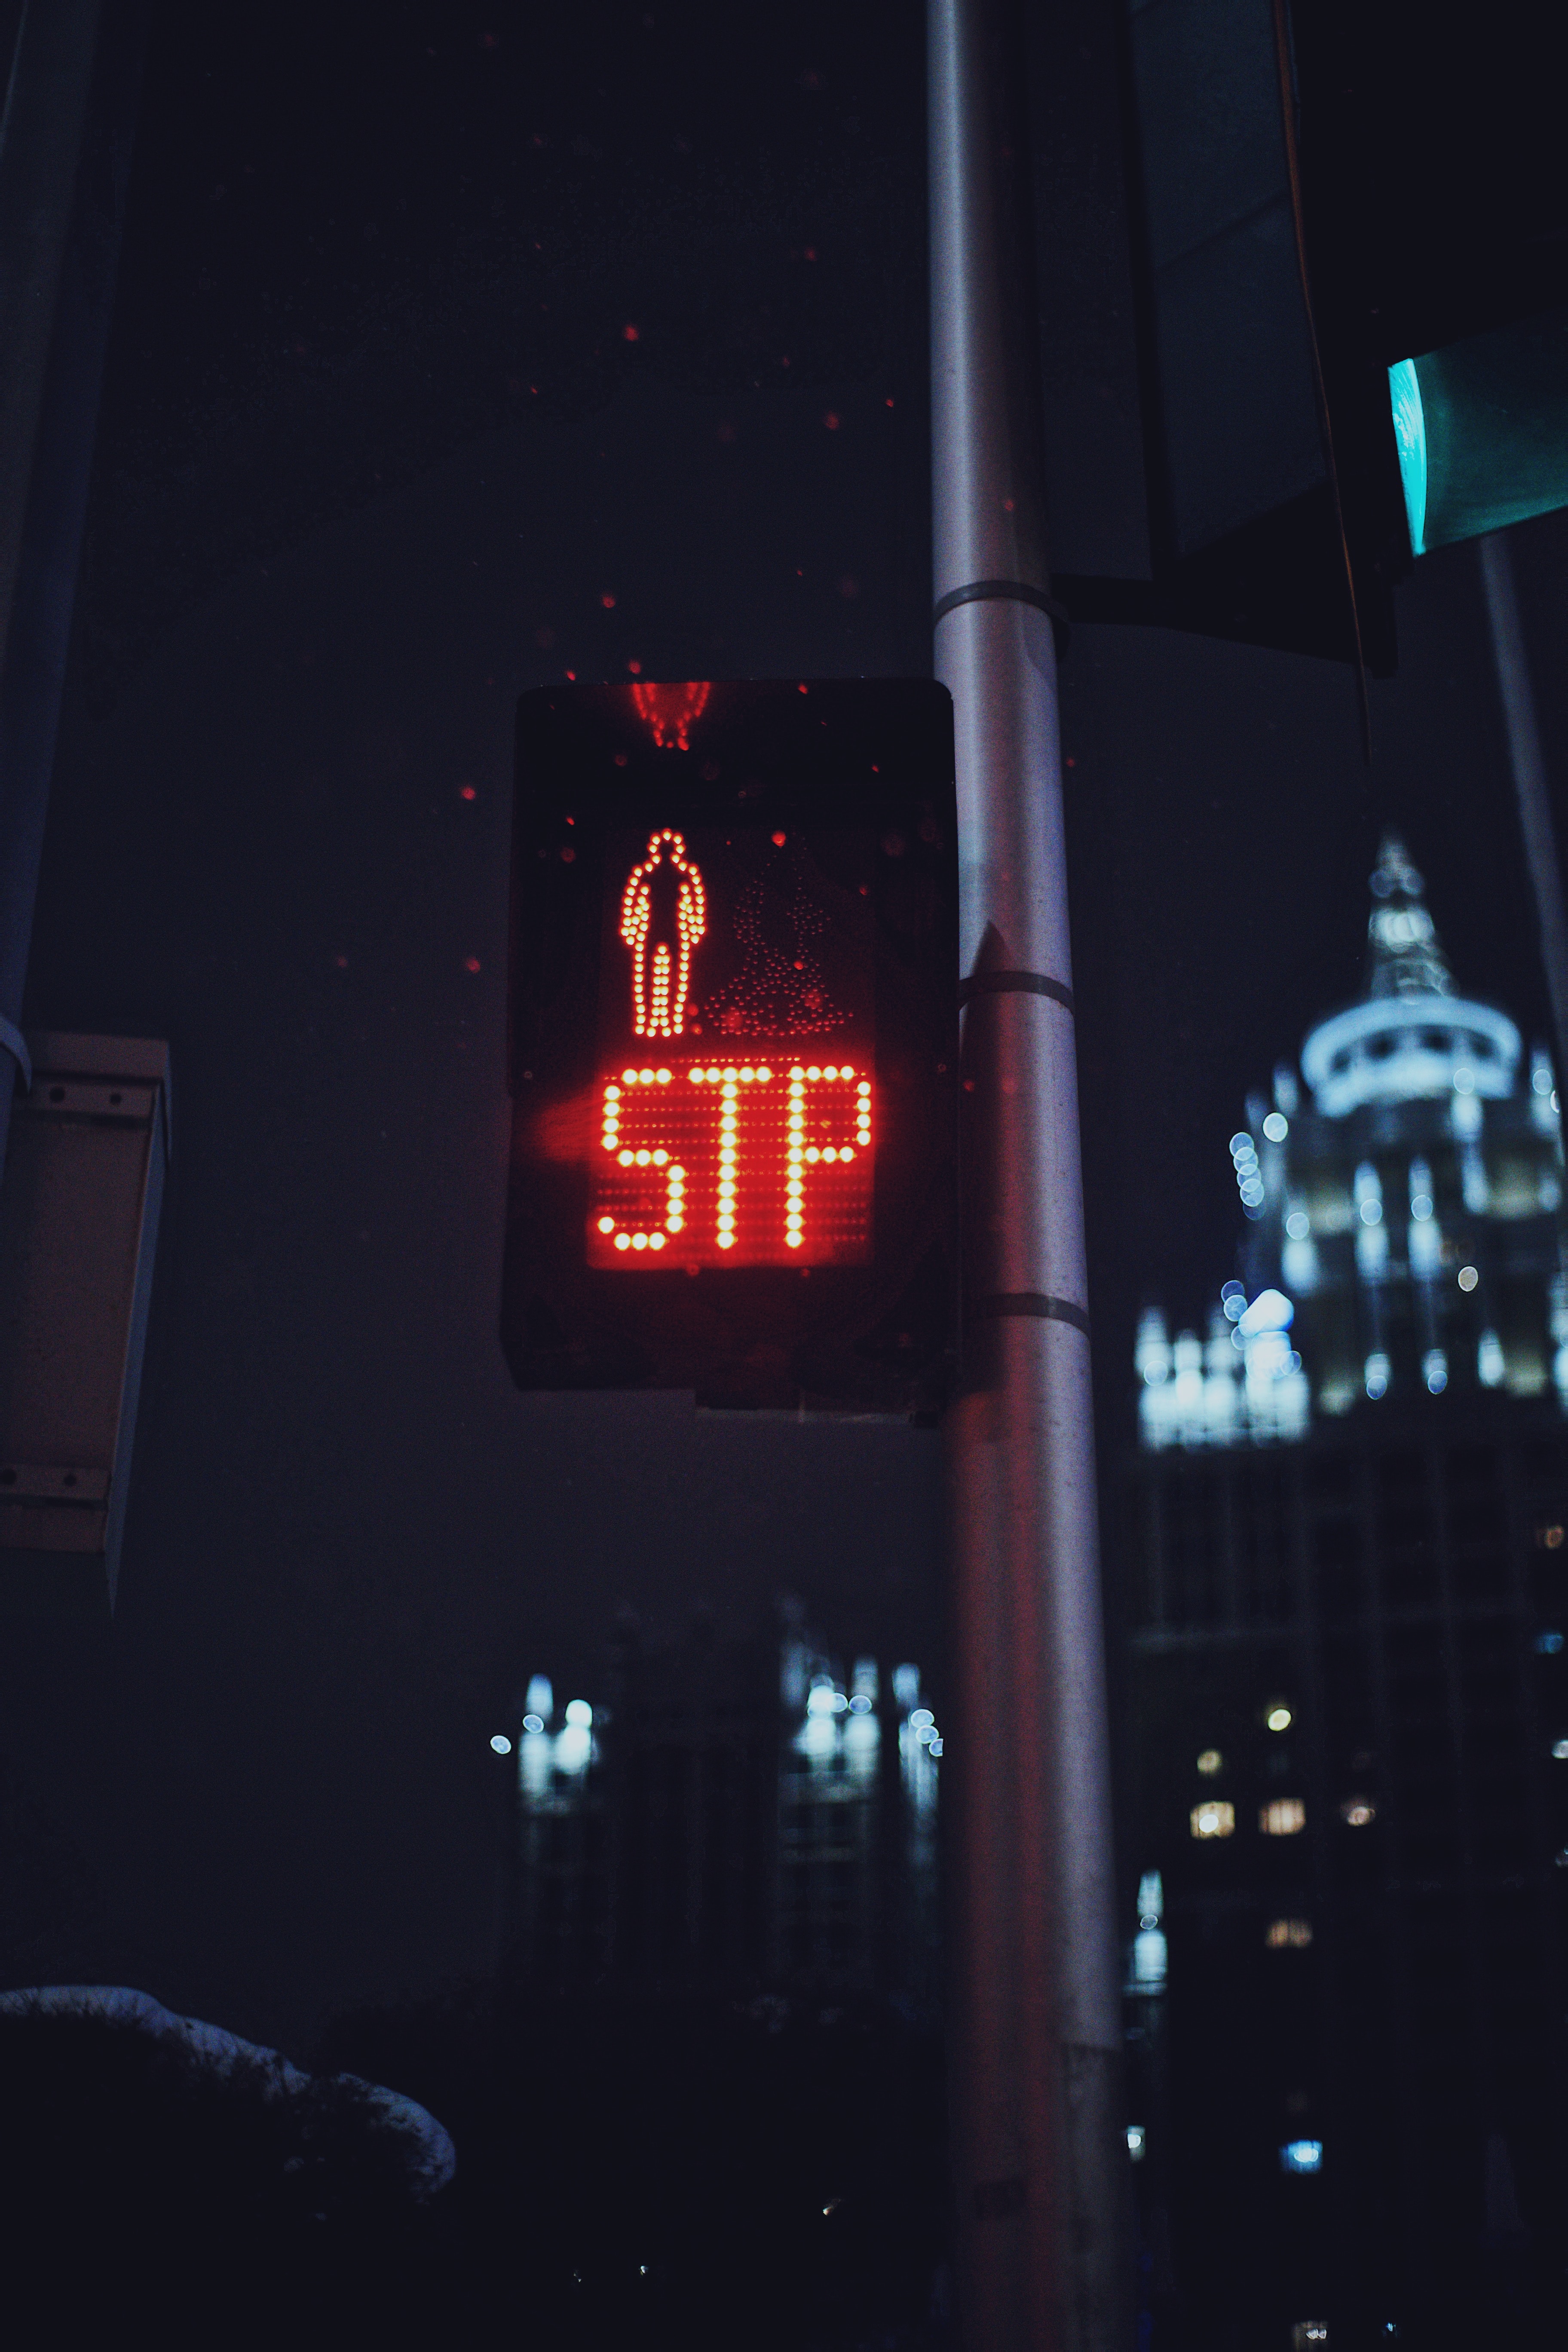 150295 download wallpaper night, red, city, miscellanea, miscellaneous, symbol, traffic light screensavers and pictures for free